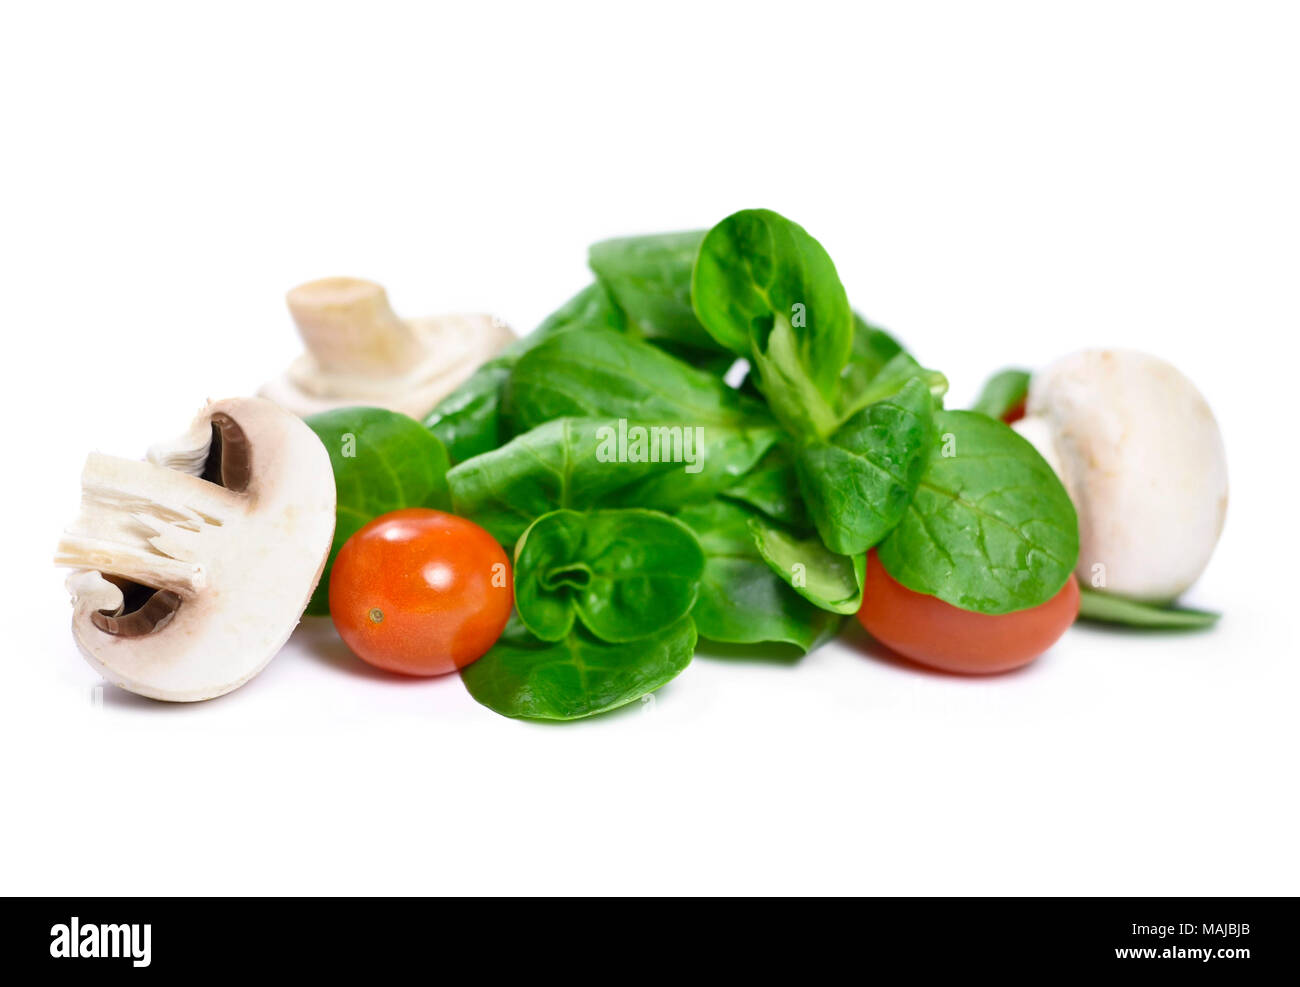 Fresh corn salad with cherry tomatoes and white mushrooms, isolated on white background. Healthy eating scene. Stock Photo